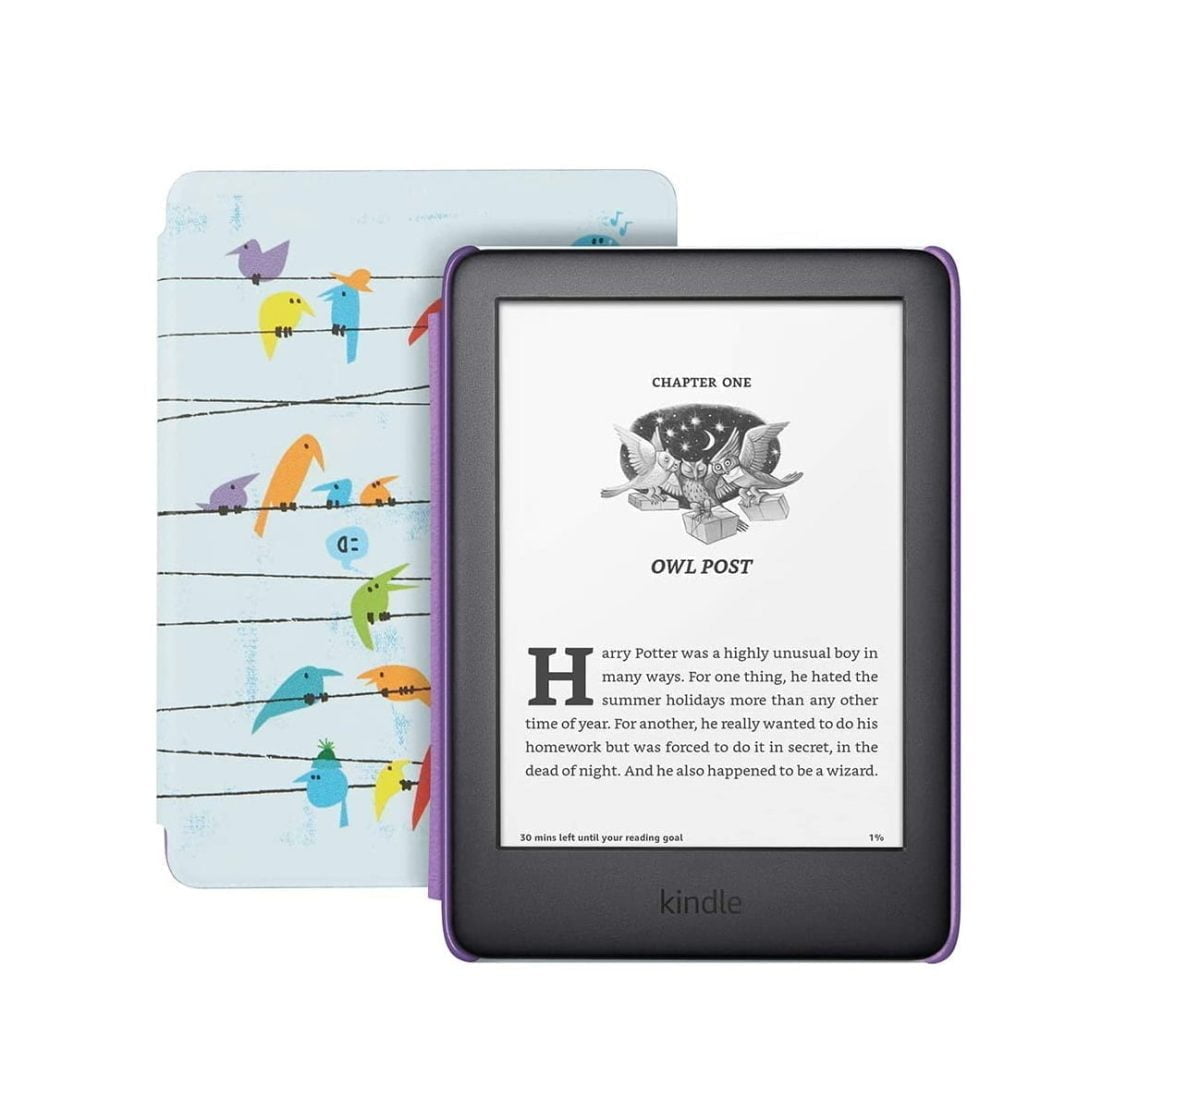 61 Amazon &Amp;Lt;H1&Amp;Gt;Kindle Kids Edition - Includes Cover - Rainbow Birds Cover&Amp;Lt;/H1&Amp;Gt; &Amp;Lt;Ul Class=&Amp;Quot;A-Unordered-List A-Vertical A-Spacing-Mini&Amp;Quot;&Amp;Gt; &Amp;Lt;Li&Amp;Gt;&Amp;Lt;Span Class=&Amp;Quot;A-List-Item&Amp;Quot;&Amp;Gt;Includes A Kindle (10Th Generation), 1 Year Of Amazon Kids+ (Freetime Unlimited), A Kid-Friendly Cover, And 2-Year Worry-Free Guarantee - Up To A $219 Value.&Amp;Lt;/Span&Amp;Gt;&Amp;Lt;/Li&Amp;Gt; &Amp;Lt;Li&Amp;Gt;&Amp;Lt;Span Class=&Amp;Quot;A-List-Item&Amp;Quot;&Amp;Gt;Kindle Kids Edition Is Purpose-Built For Reading (Not A Toy), With A Black &Amp;Amp; White Glare-Free Display And Weeks Of Battery Life. It Performs Differently Than A Tablet, Because It’s Geared For Reading Books – No Games, Ads Or Videos Means Zero Distractions.&Amp;Lt;/Span&Amp;Gt;&Amp;Lt;/Li&Amp;Gt; &Amp;Lt;Li&Amp;Gt;&Amp;Lt;Span Class=&Amp;Quot;A-List-Item&Amp;Quot;&Amp;Gt;With The Included Year Of Amazon Kids+, Kids Can Explore Popular Titles And Series. After 1 Year, Your Subscription Will Automatically Renew Every Month Starting At Just $2.99/Month Plus Applicable Tax. You May Cancel At Any Time By Visiting The Amazon Parent Dashboard Or Contacting Customer Service.&Amp;Lt;/Span&Amp;Gt;&Amp;Lt;/Li&Amp;Gt; &Amp;Lt;Li&Amp;Gt;&Amp;Lt;Span Class=&Amp;Quot;A-List-Item&Amp;Quot;&Amp;Gt;Amazon Kids+ Includes The Complete Harry Potter Series, And The First Book From Other Popular Series Such As Artemis Fowl. Parents Can Purchase Additional Titles From The Kindle Store.&Amp;Lt;/Span&Amp;Gt;&Amp;Lt;/Li&Amp;Gt; &Amp;Lt;Li&Amp;Gt;&Amp;Lt;Span Class=&Amp;Quot;A-List-Item&Amp;Quot;&Amp;Gt;Take The Library With You. Kindle Kids Edition Holds Over A Thousand Amazon Kids+ Titles And Provides Weeks Of Battery Life.&Amp;Lt;/Span&Amp;Gt;&Amp;Lt;/Li&Amp;Gt; &Amp;Lt;Li&Amp;Gt;&Amp;Lt;Span Class=&Amp;Quot;A-List-Item&Amp;Quot;&Amp;Gt;Now With Audible. Pair With Bluetooth Headphones Or Speakers To Listen To Your Story.&Amp;Lt;/Span&Amp;Gt;&Amp;Lt;/Li&Amp;Gt; &Amp;Lt;/Ul&Amp;Gt; &Amp;Lt;Strong&Amp;Gt;Included In The Box&Amp;Lt;/Strong&Amp;Gt; Kindle, Cover, Usb 2.0 Charging Cable And &Amp;Lt;A Href=&Amp;Quot;Https://Customerdocumentation.s3-Us-West-2.Amazonaws.com/Ej/Kindle+Kids+Edition_Quick_Start_Guide_Us.pdf&Amp;Quot;&Amp;Gt;Quick Start Guide&Amp;Lt;/A&Amp;Gt;. &Amp;Lt;Strong&Amp;Gt;Age Range&Amp;Lt;/Strong&Amp;Gt; Ages 7 And Up. &Amp;Lt;Strong&Amp;Gt;Generation&Amp;Lt;/Strong&Amp;Gt; Kindle 10Th Generation - 2019 Release. &Amp;Lt;Strong&Amp;Gt;Colors&Amp;Lt;/Strong&Amp;Gt; Black Kindle With Pink/Blue/Rainbow Birds/Space Station Cover. Kindle Kids Kindle Kids Edition - Includes Cover - Rainbow Birds Cover